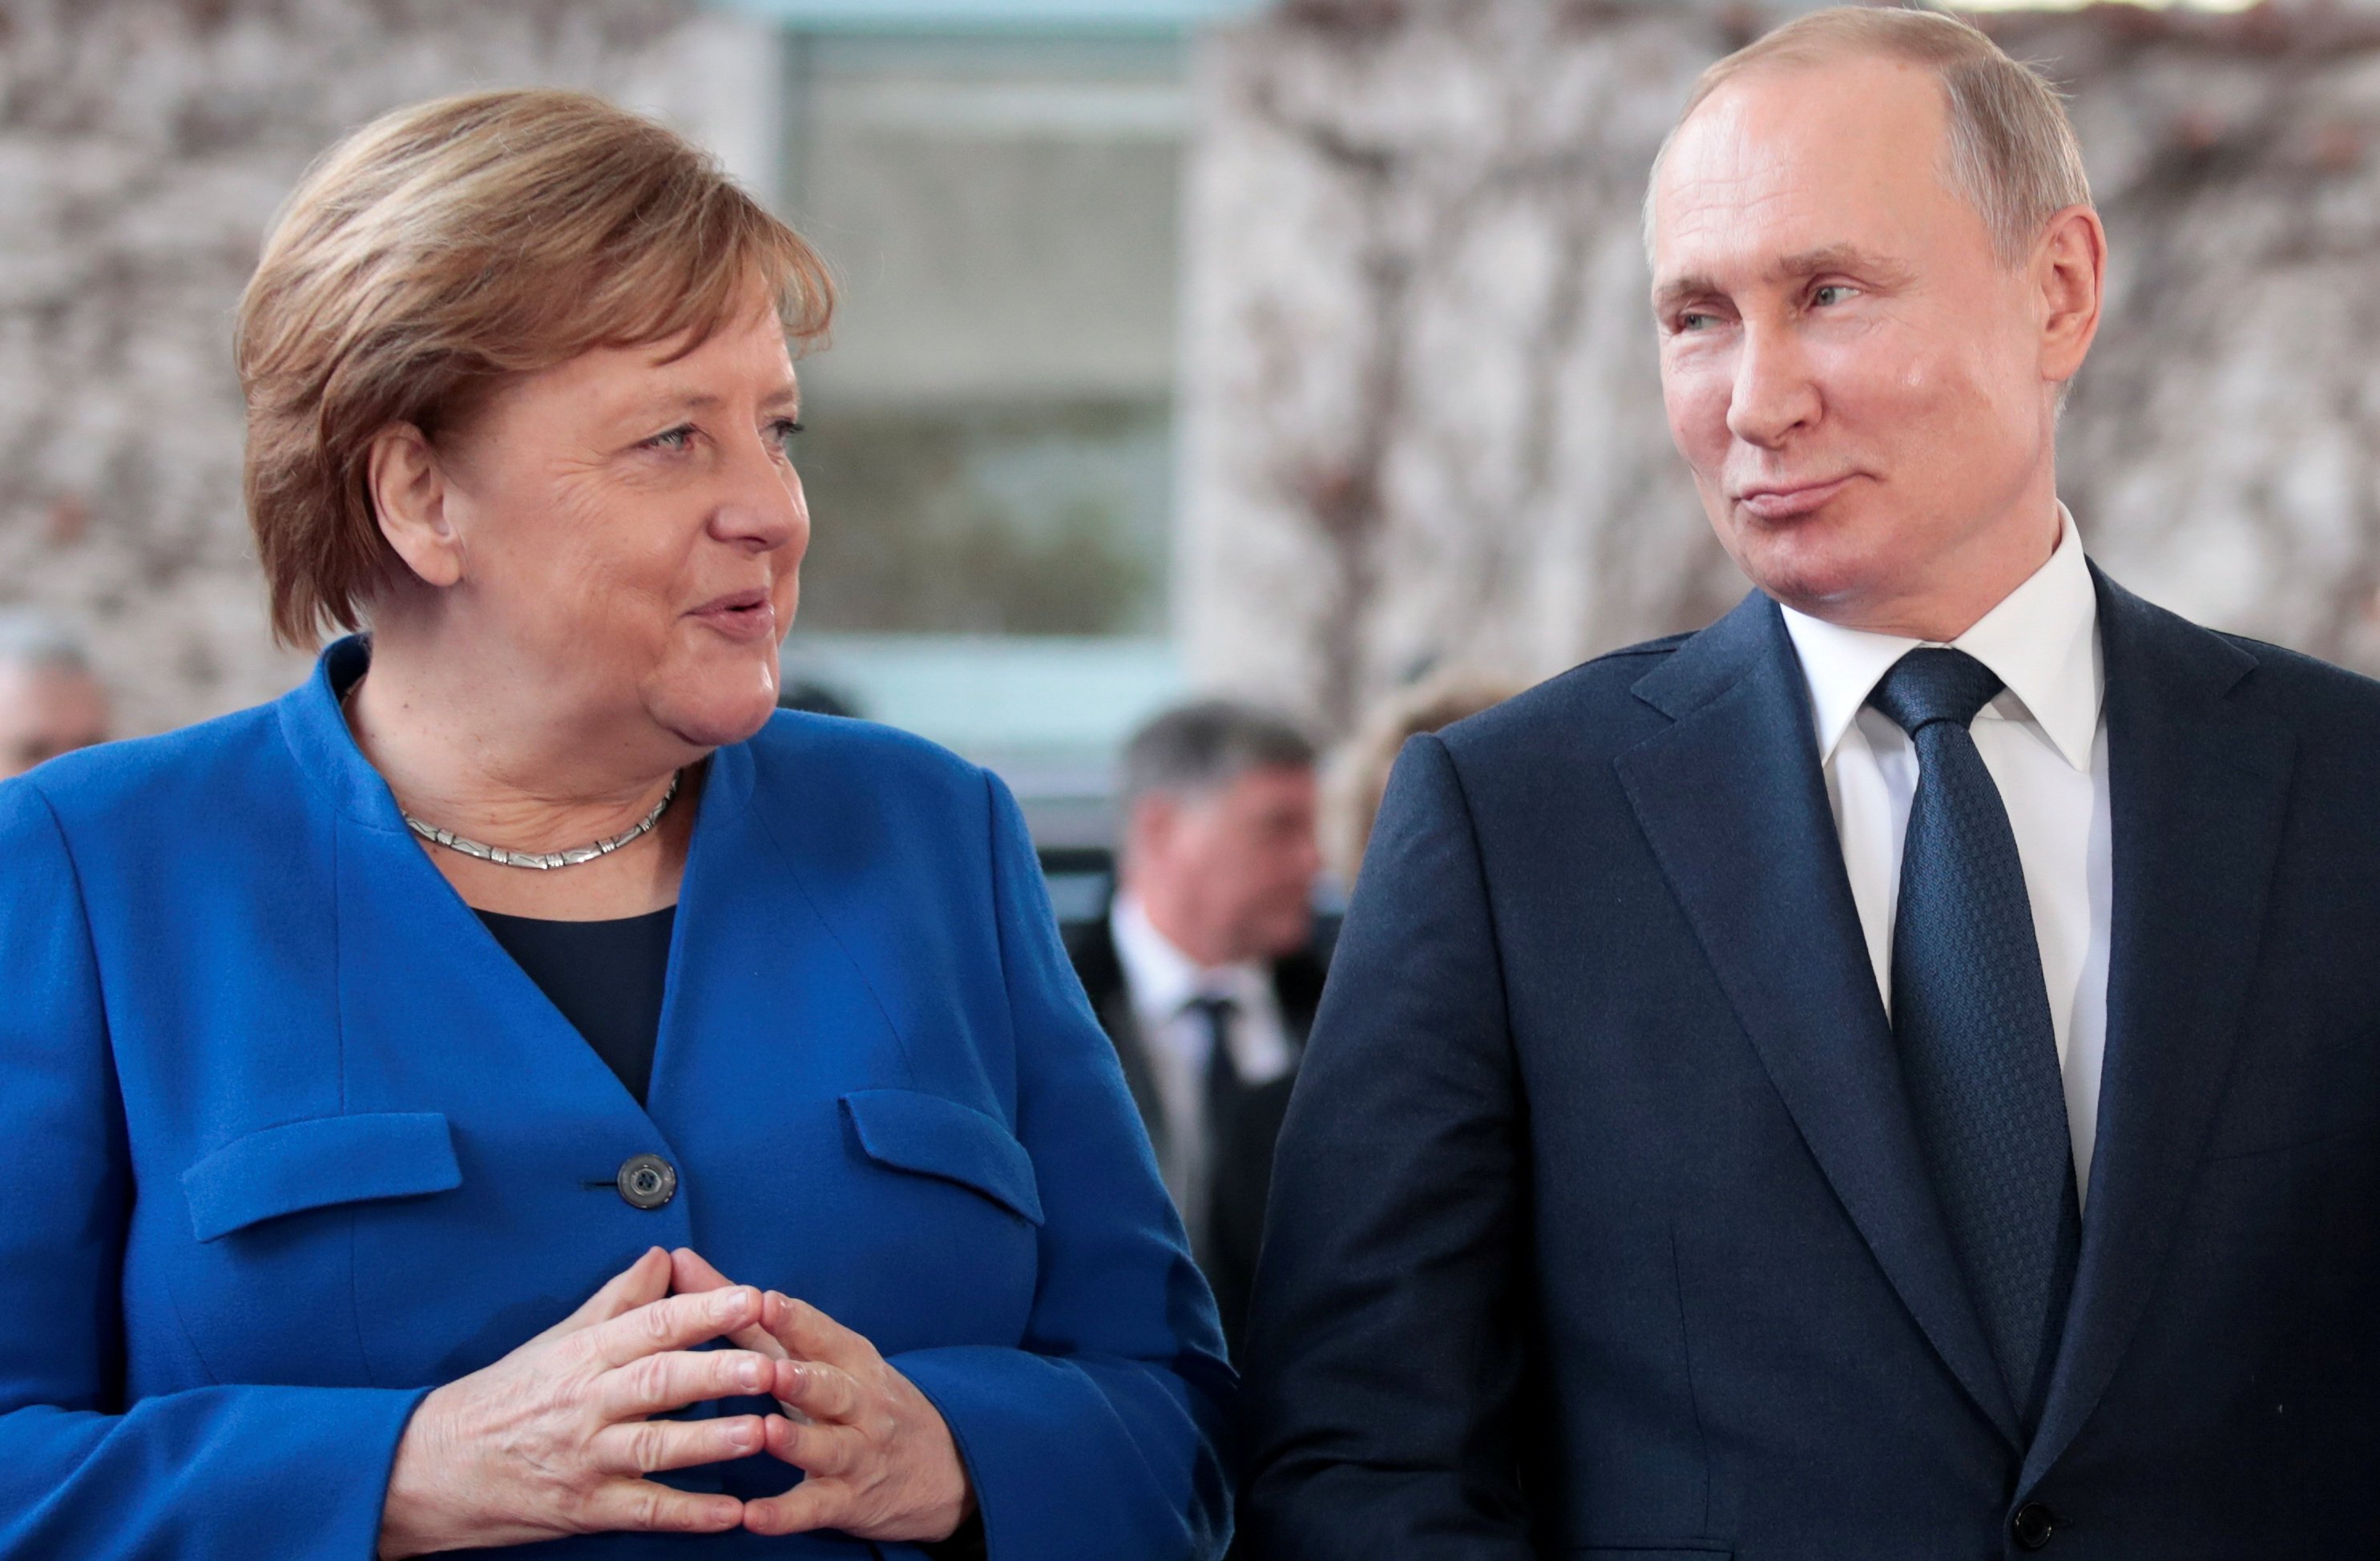 German Chancellor Angela Merkel and Russian President Vladimir Putin pose for a picture as he arrives to attend the Libya summit in Berlin in January 2020. Photo: Reuters